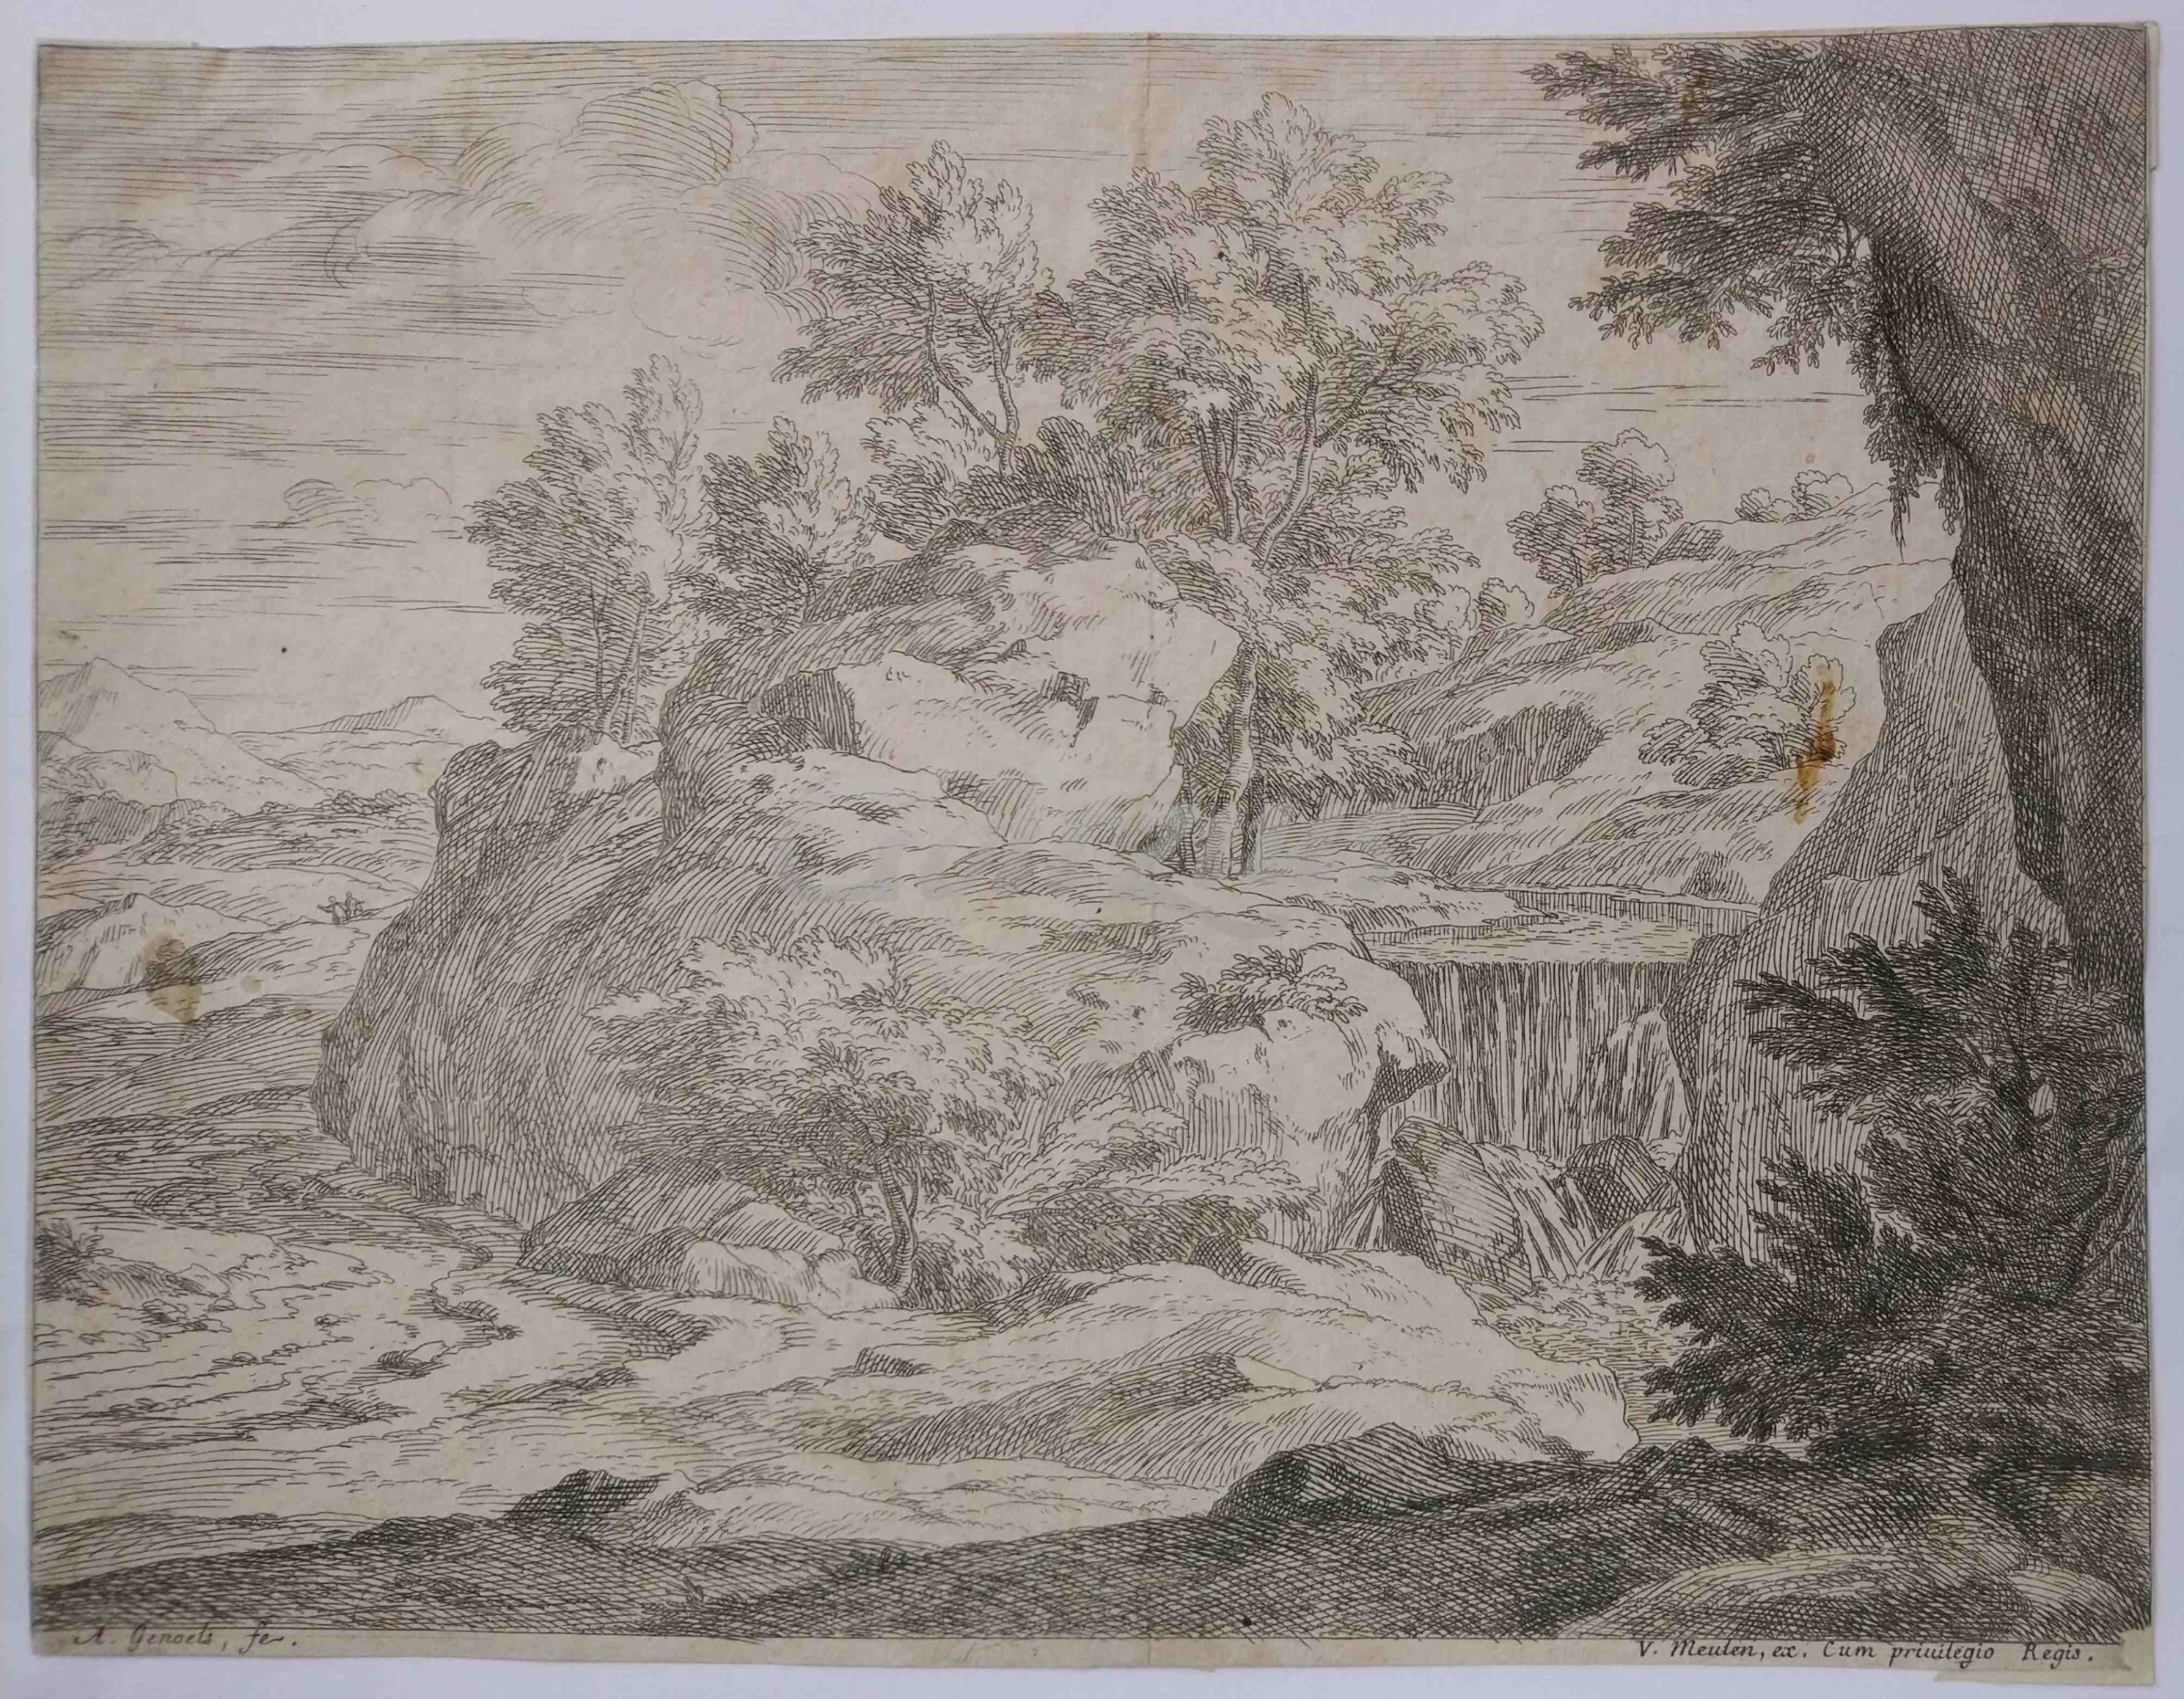 GENOELS, ABRAHAM, Rocky landscape with waterfall